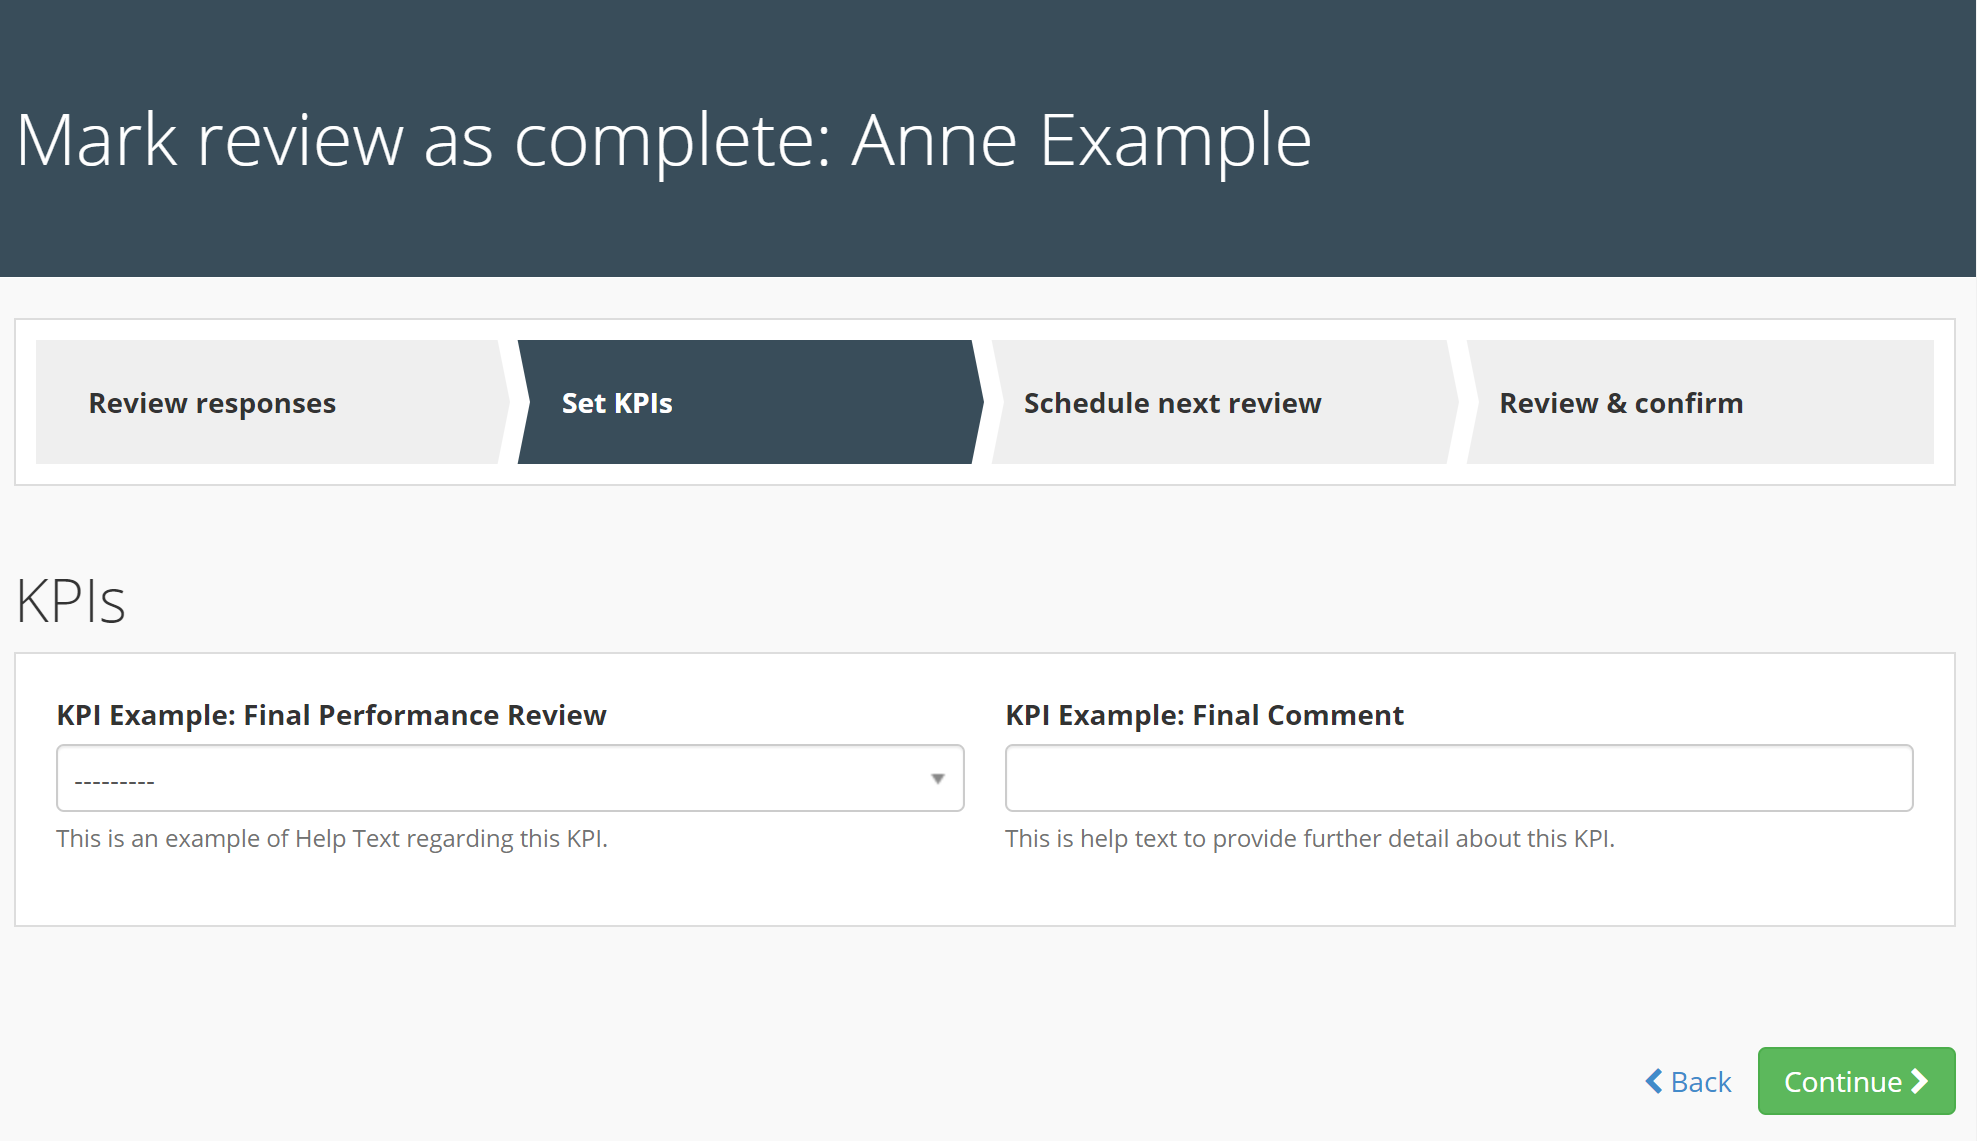 Image of both KPI examples side by side in the final Completion Form of the Performance Review. The help text is automatically displayed beneath the entry field for each KPI.